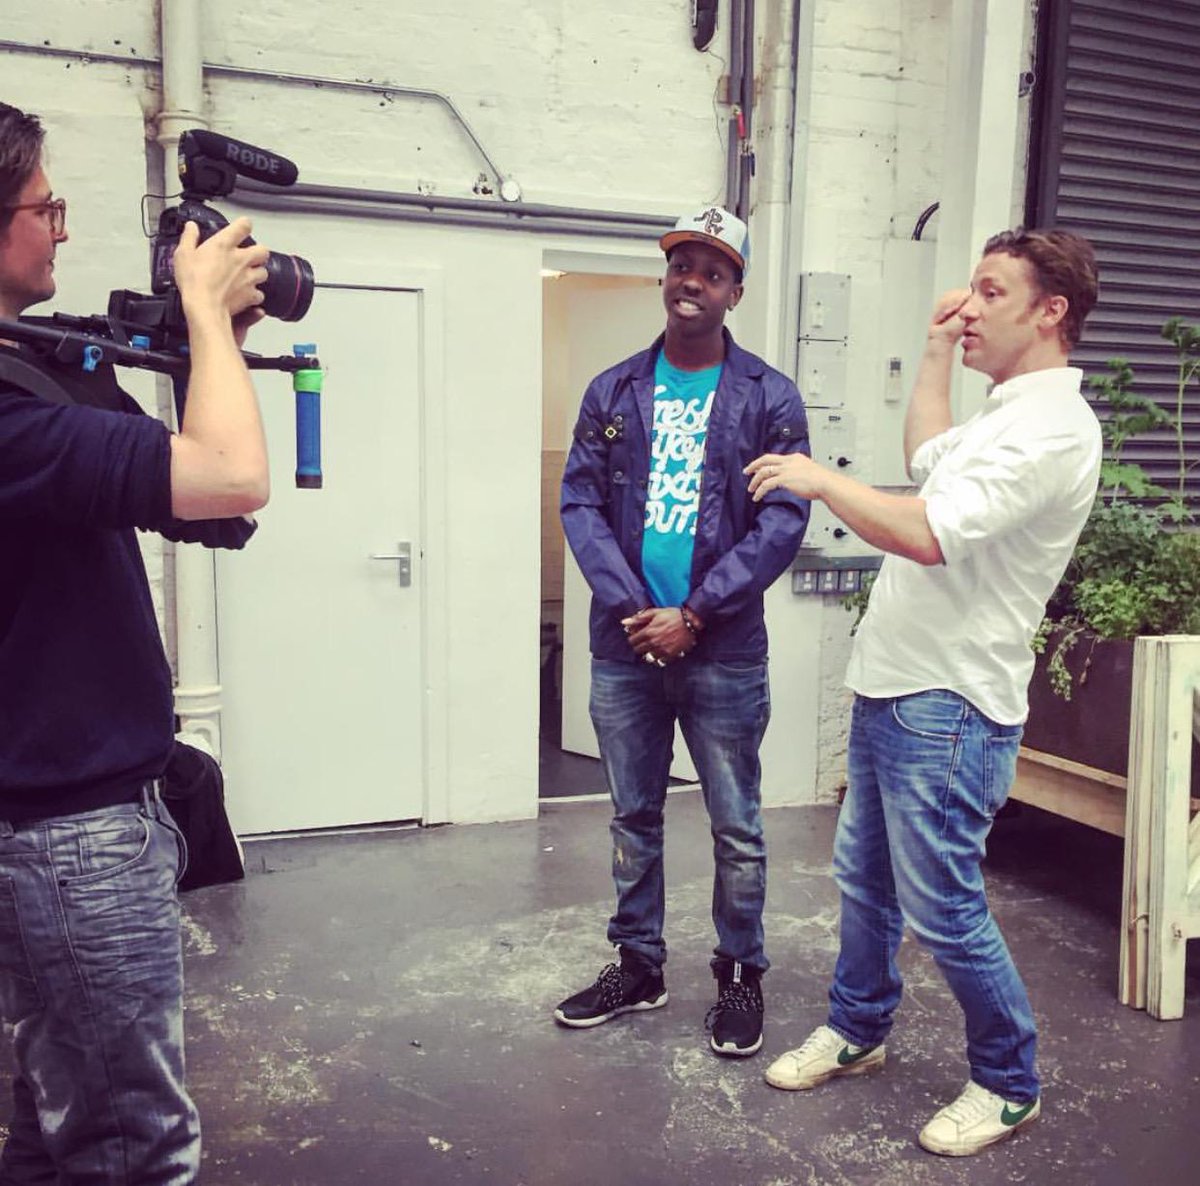 RT @jamaledwards: Dropping a collab with @jamieoliver @JamiesFoodTube at midday. This one is a bit different but fun! http://t.co/BvgwedQ33r